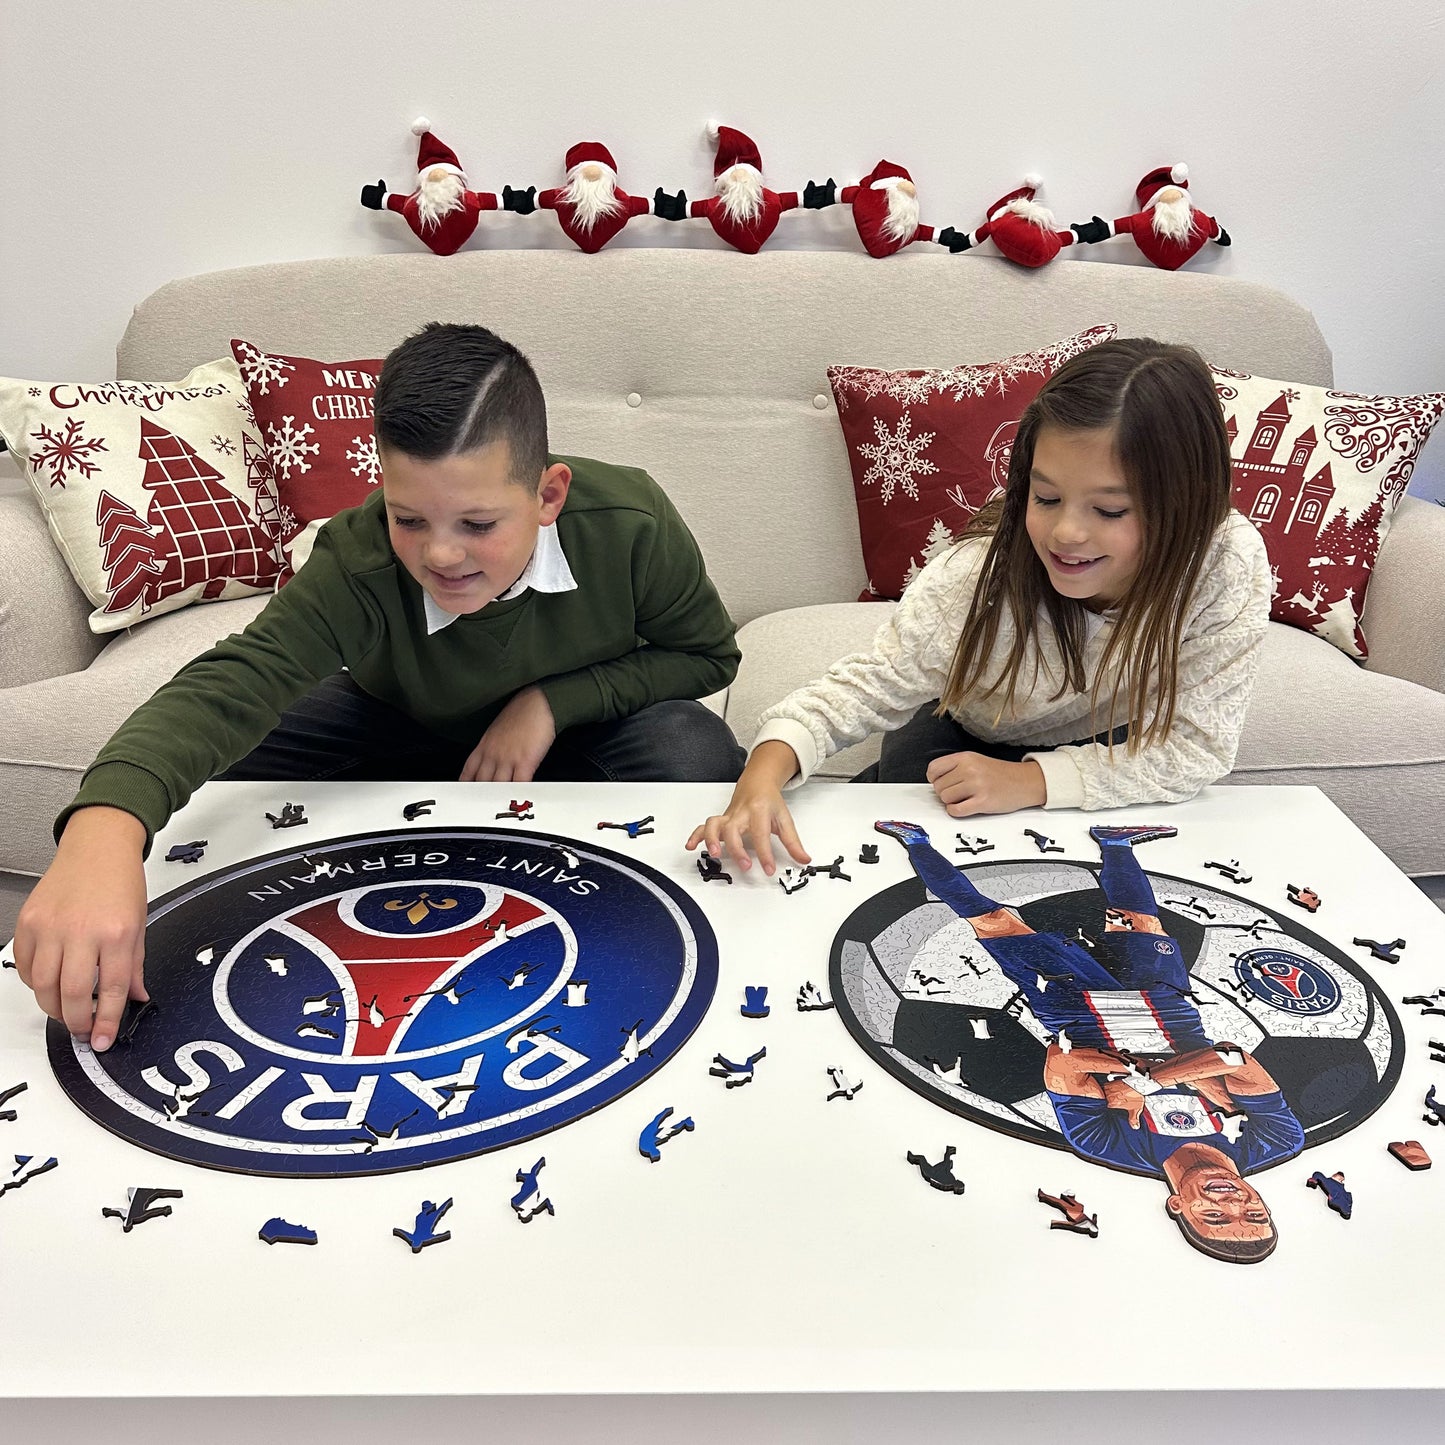 ⚽⚽ FOR ALL PSG AND FOOTBALL ⚽ LOVERS😍😍 HERE COMES PSG PARIS SAINT  GERMAIN 1000 PCS PUZZLE AND MAGNETS AND POSTER ALSO LOTS OF OTHER 2 IN 1  3 IN, By The Goodie Bag